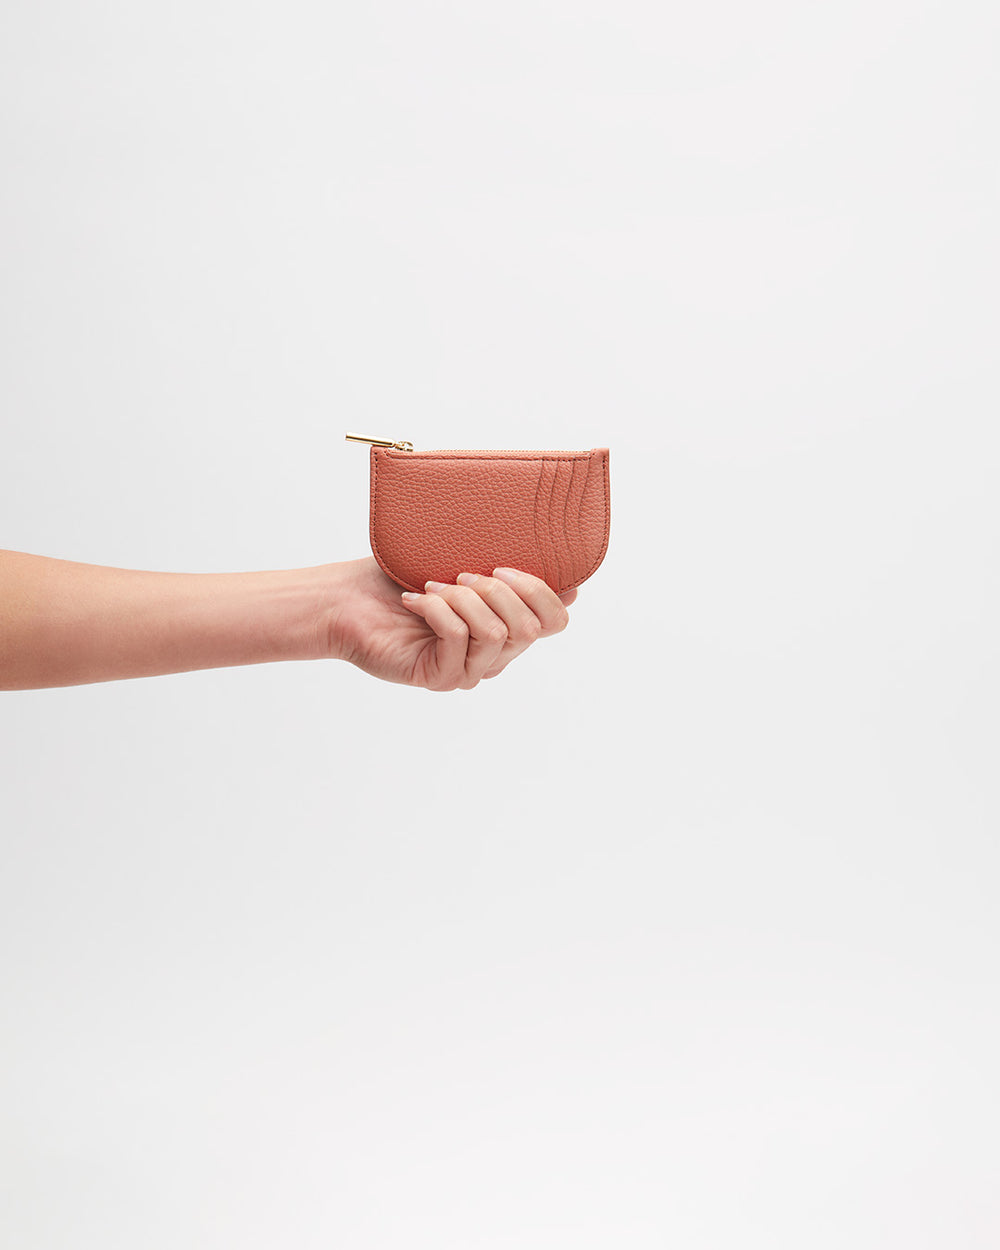 Hand holding a small purse against a plain background.